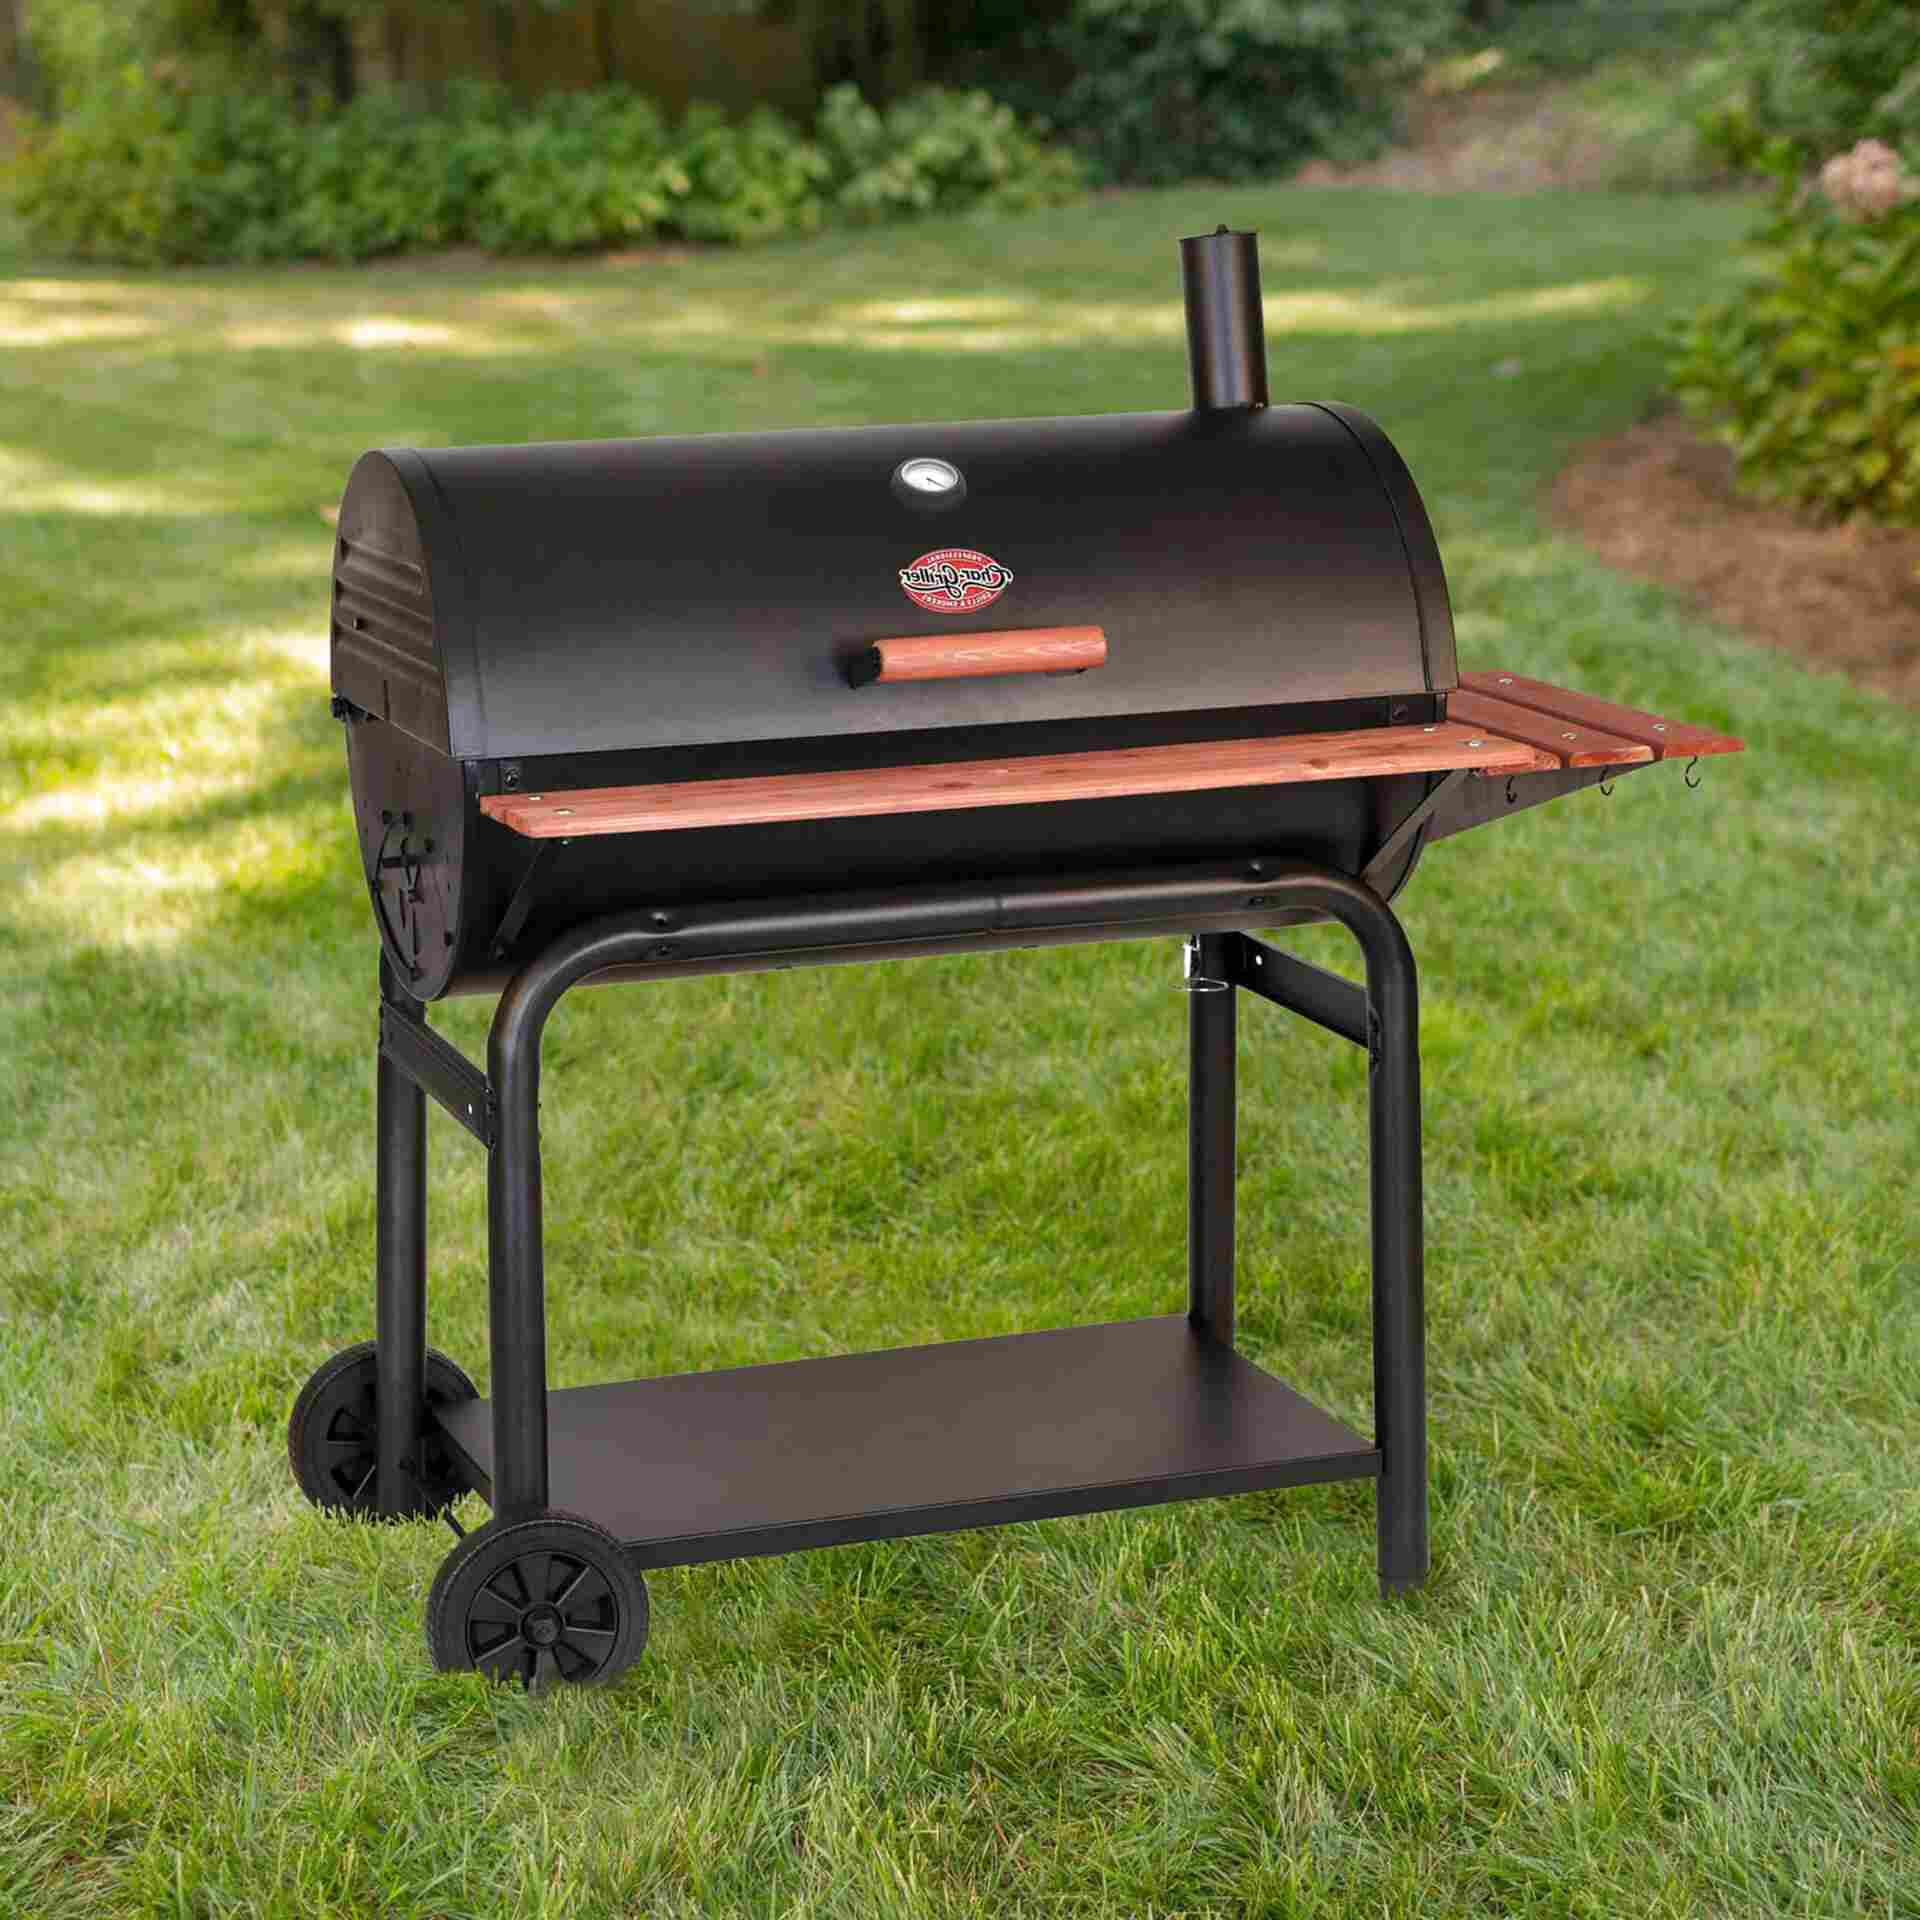 Chargrill Charcoal Grill for sale in UK